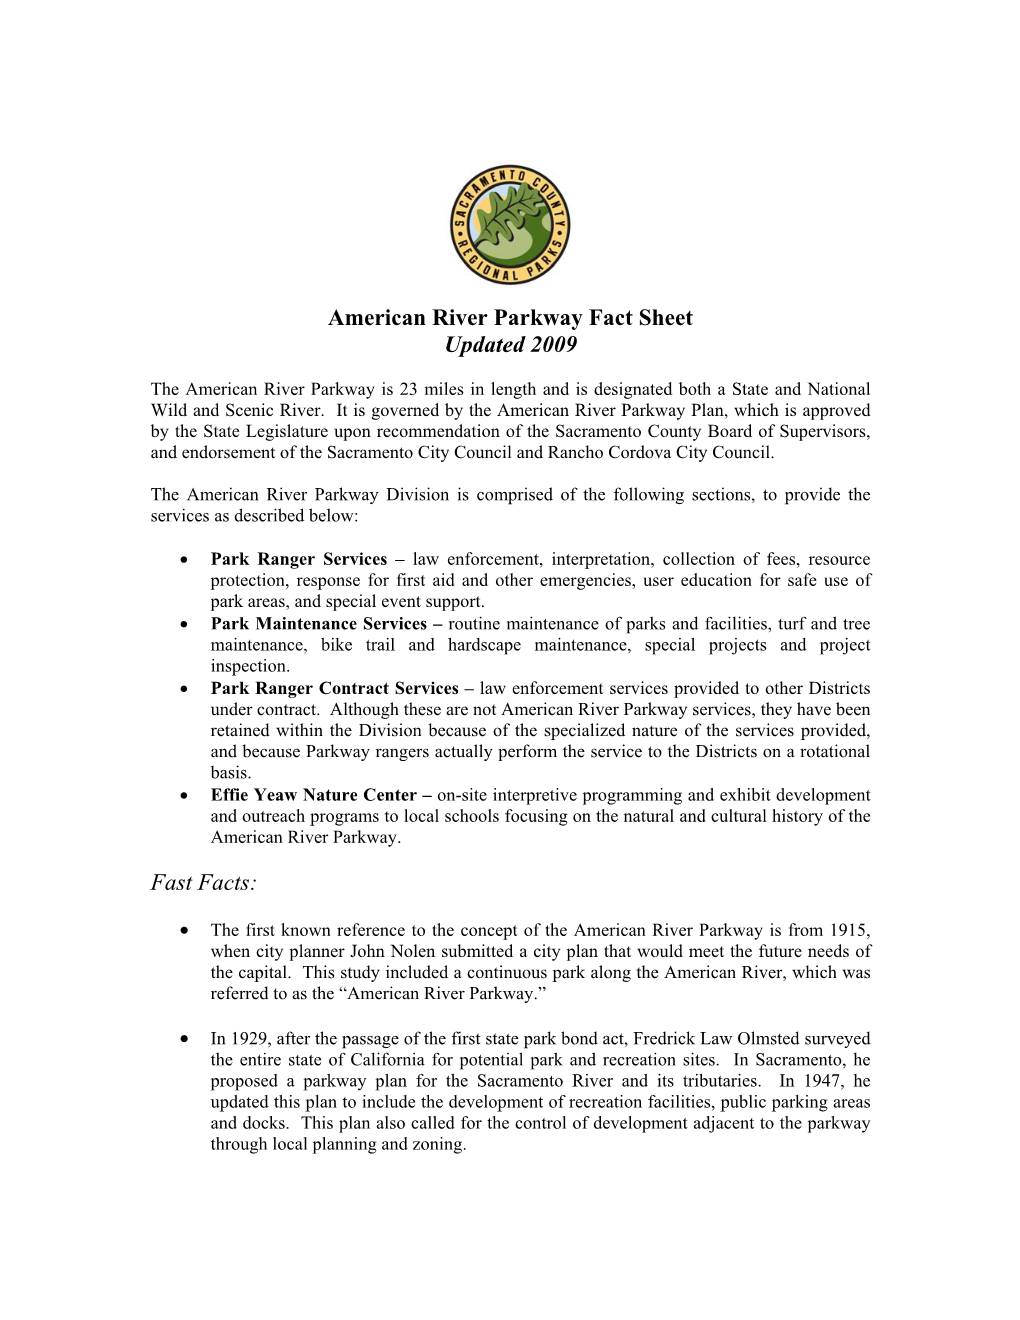 American River Parkway Fact Sheet Updated 2009 Fast Facts